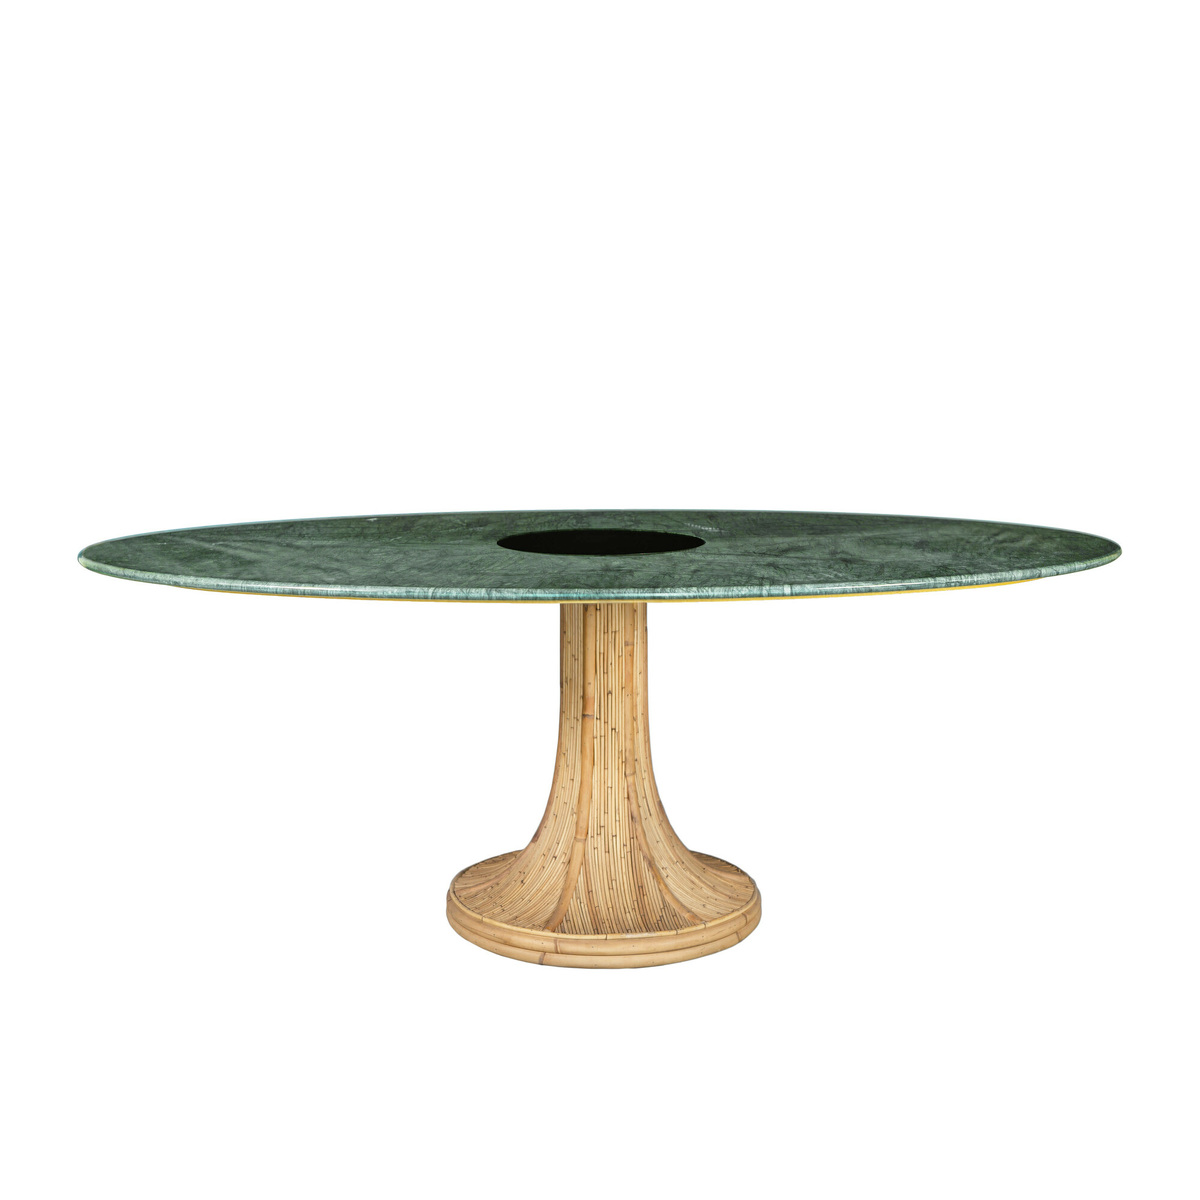 Oval Dining Table Riviera, Green / Natural - ⌀199 x H74 cm - Carrara marble / Rattan - image 1